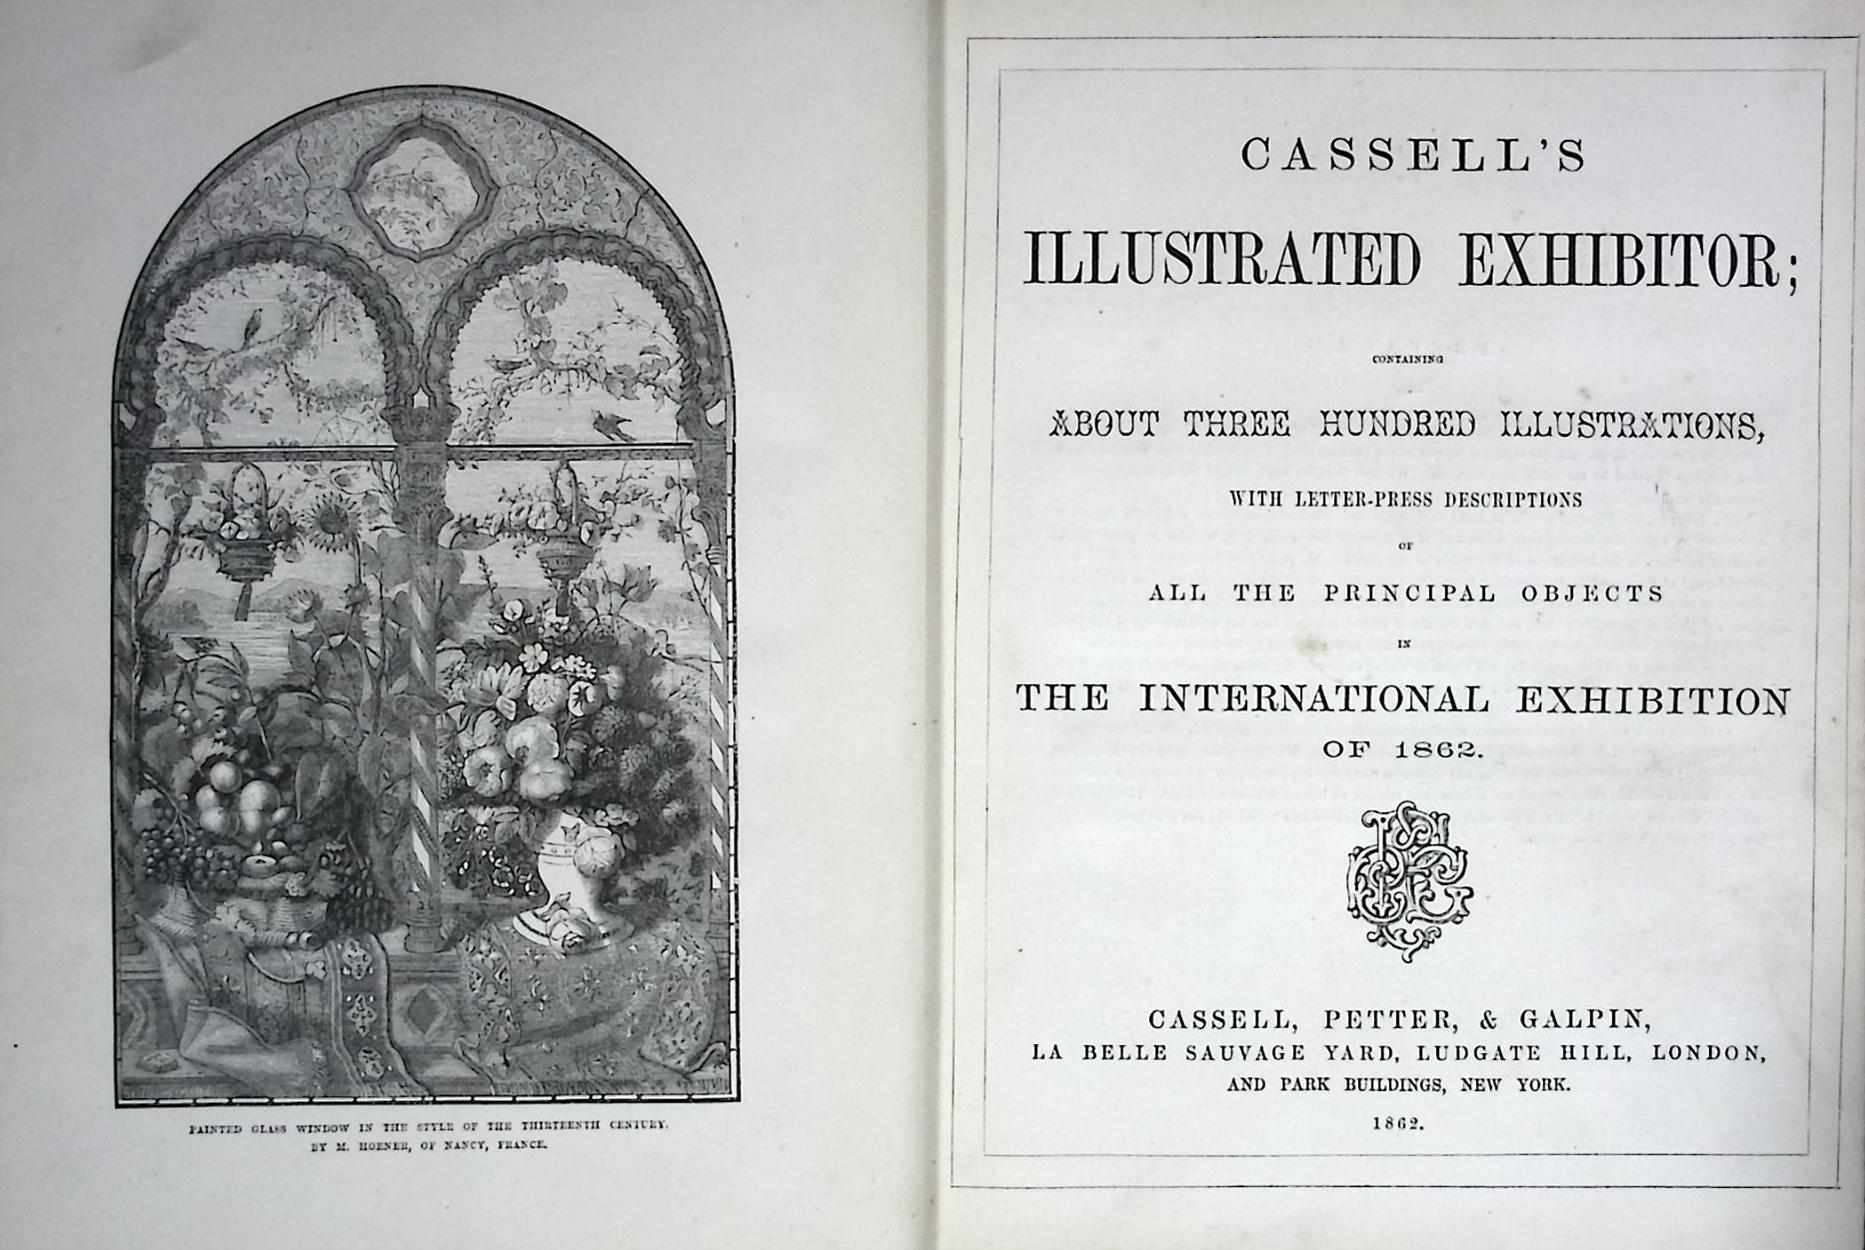 Cassell's Illustrated Exhibitor; Containing About Three Hundred Illustrations, with Letter-Press descriptions of all the Principal objects in the International Exhibition of 1862.